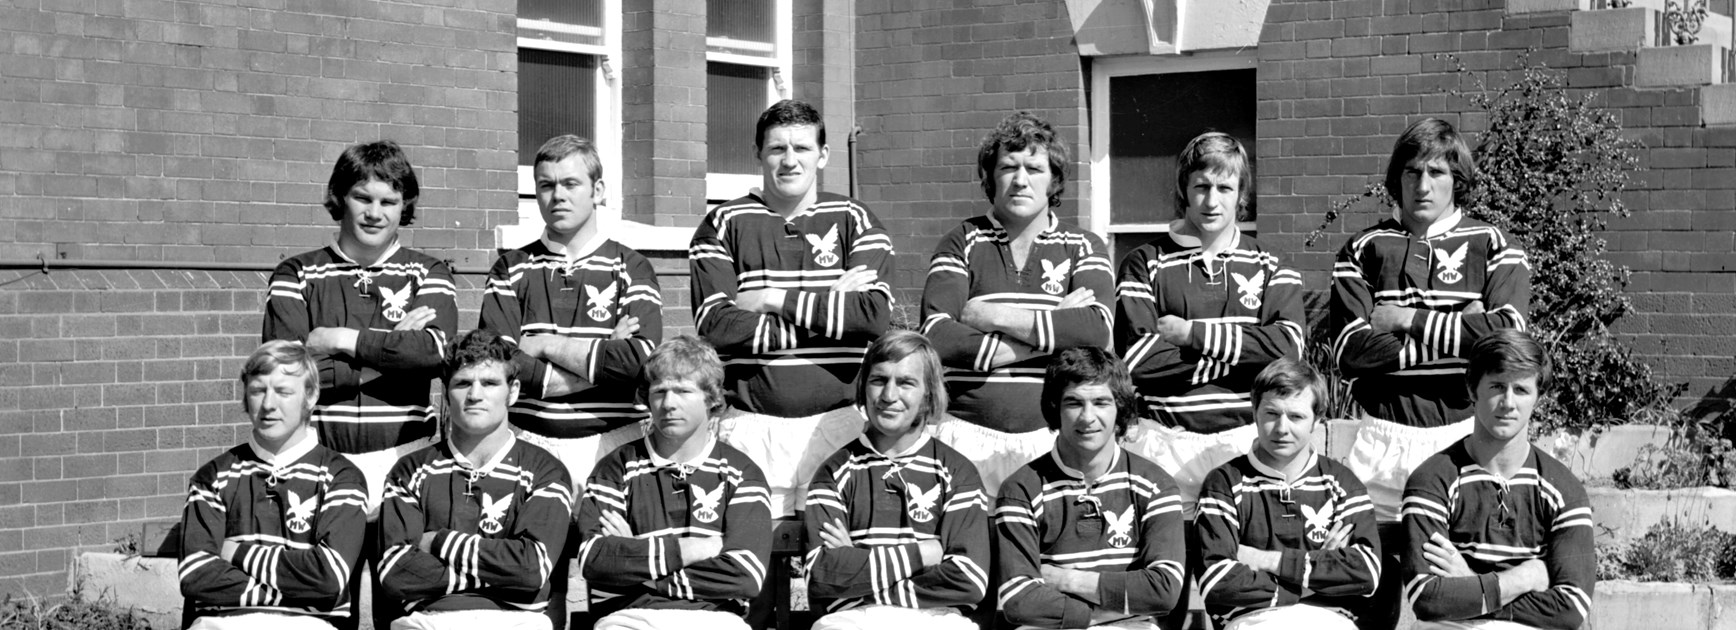 Fifty years since Sea Eagles'  first premiership